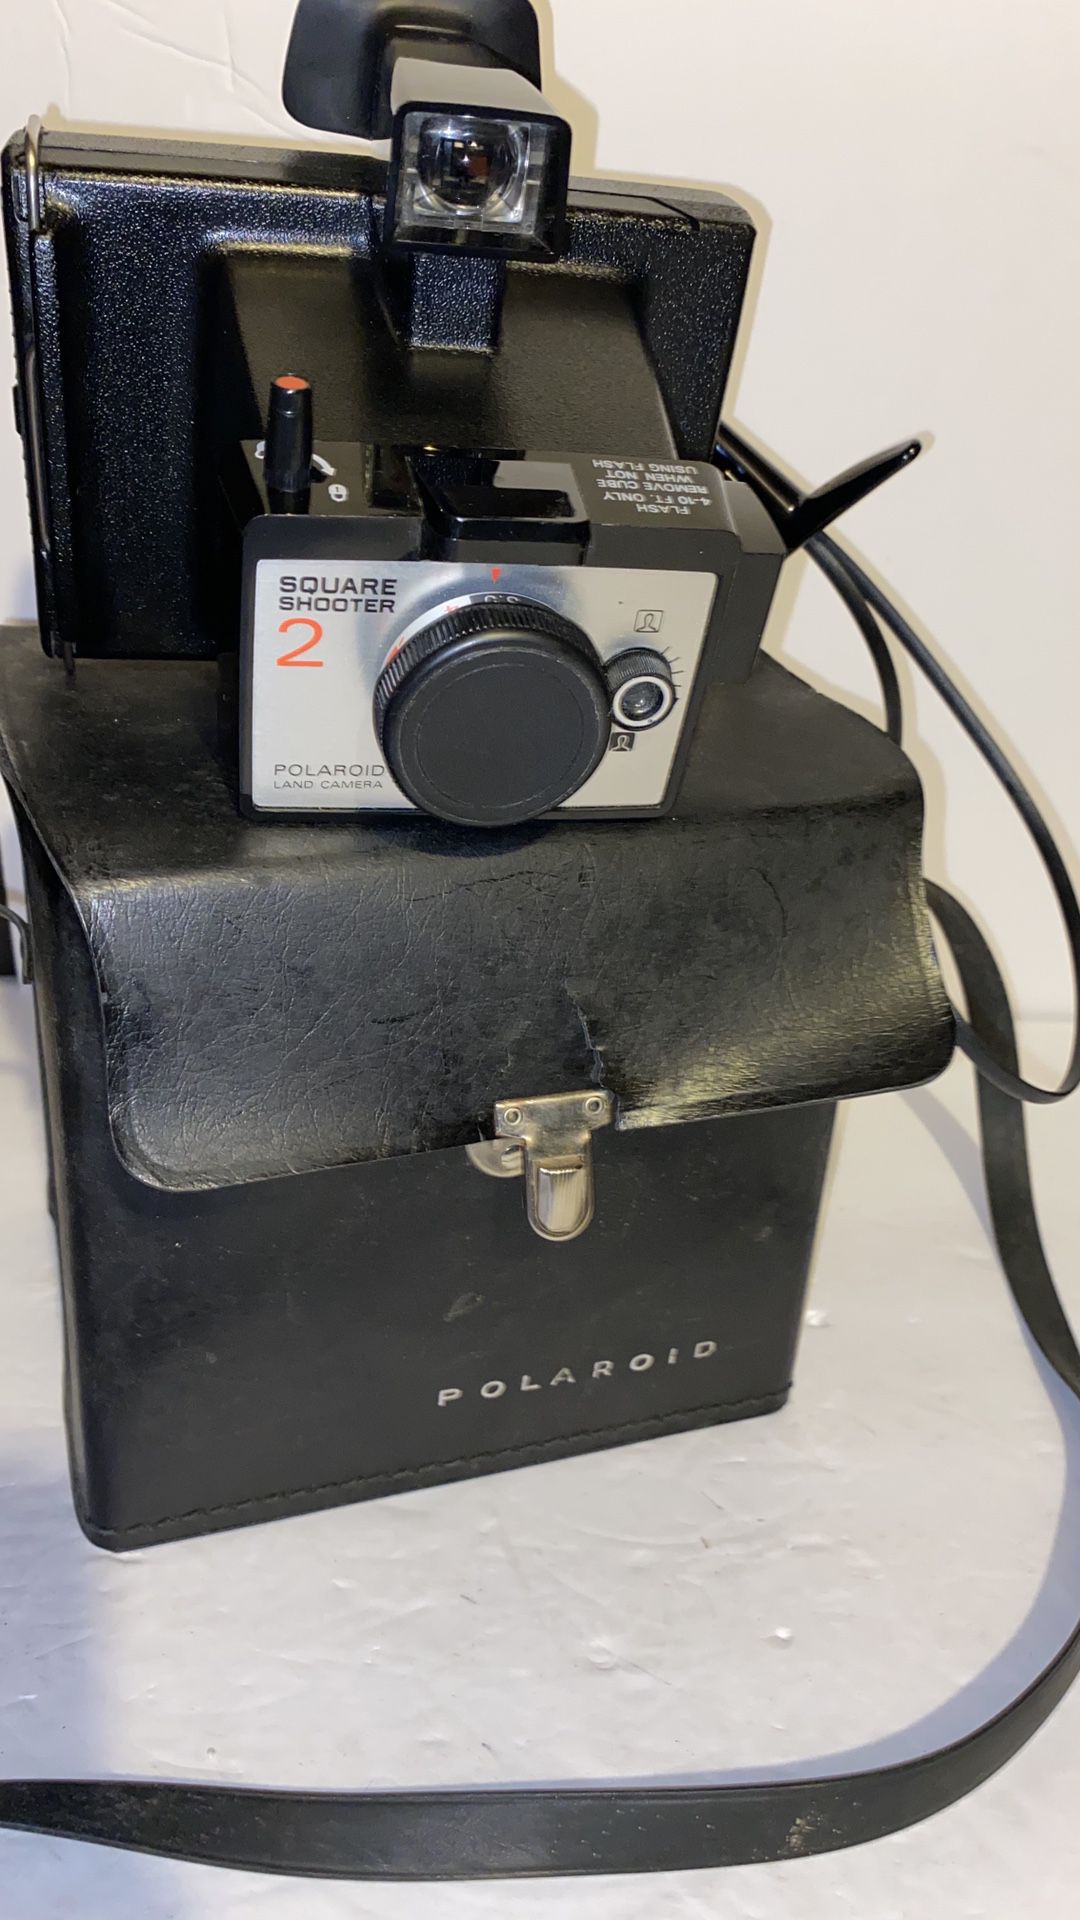 Vintage Polaroid square shooter camera with case